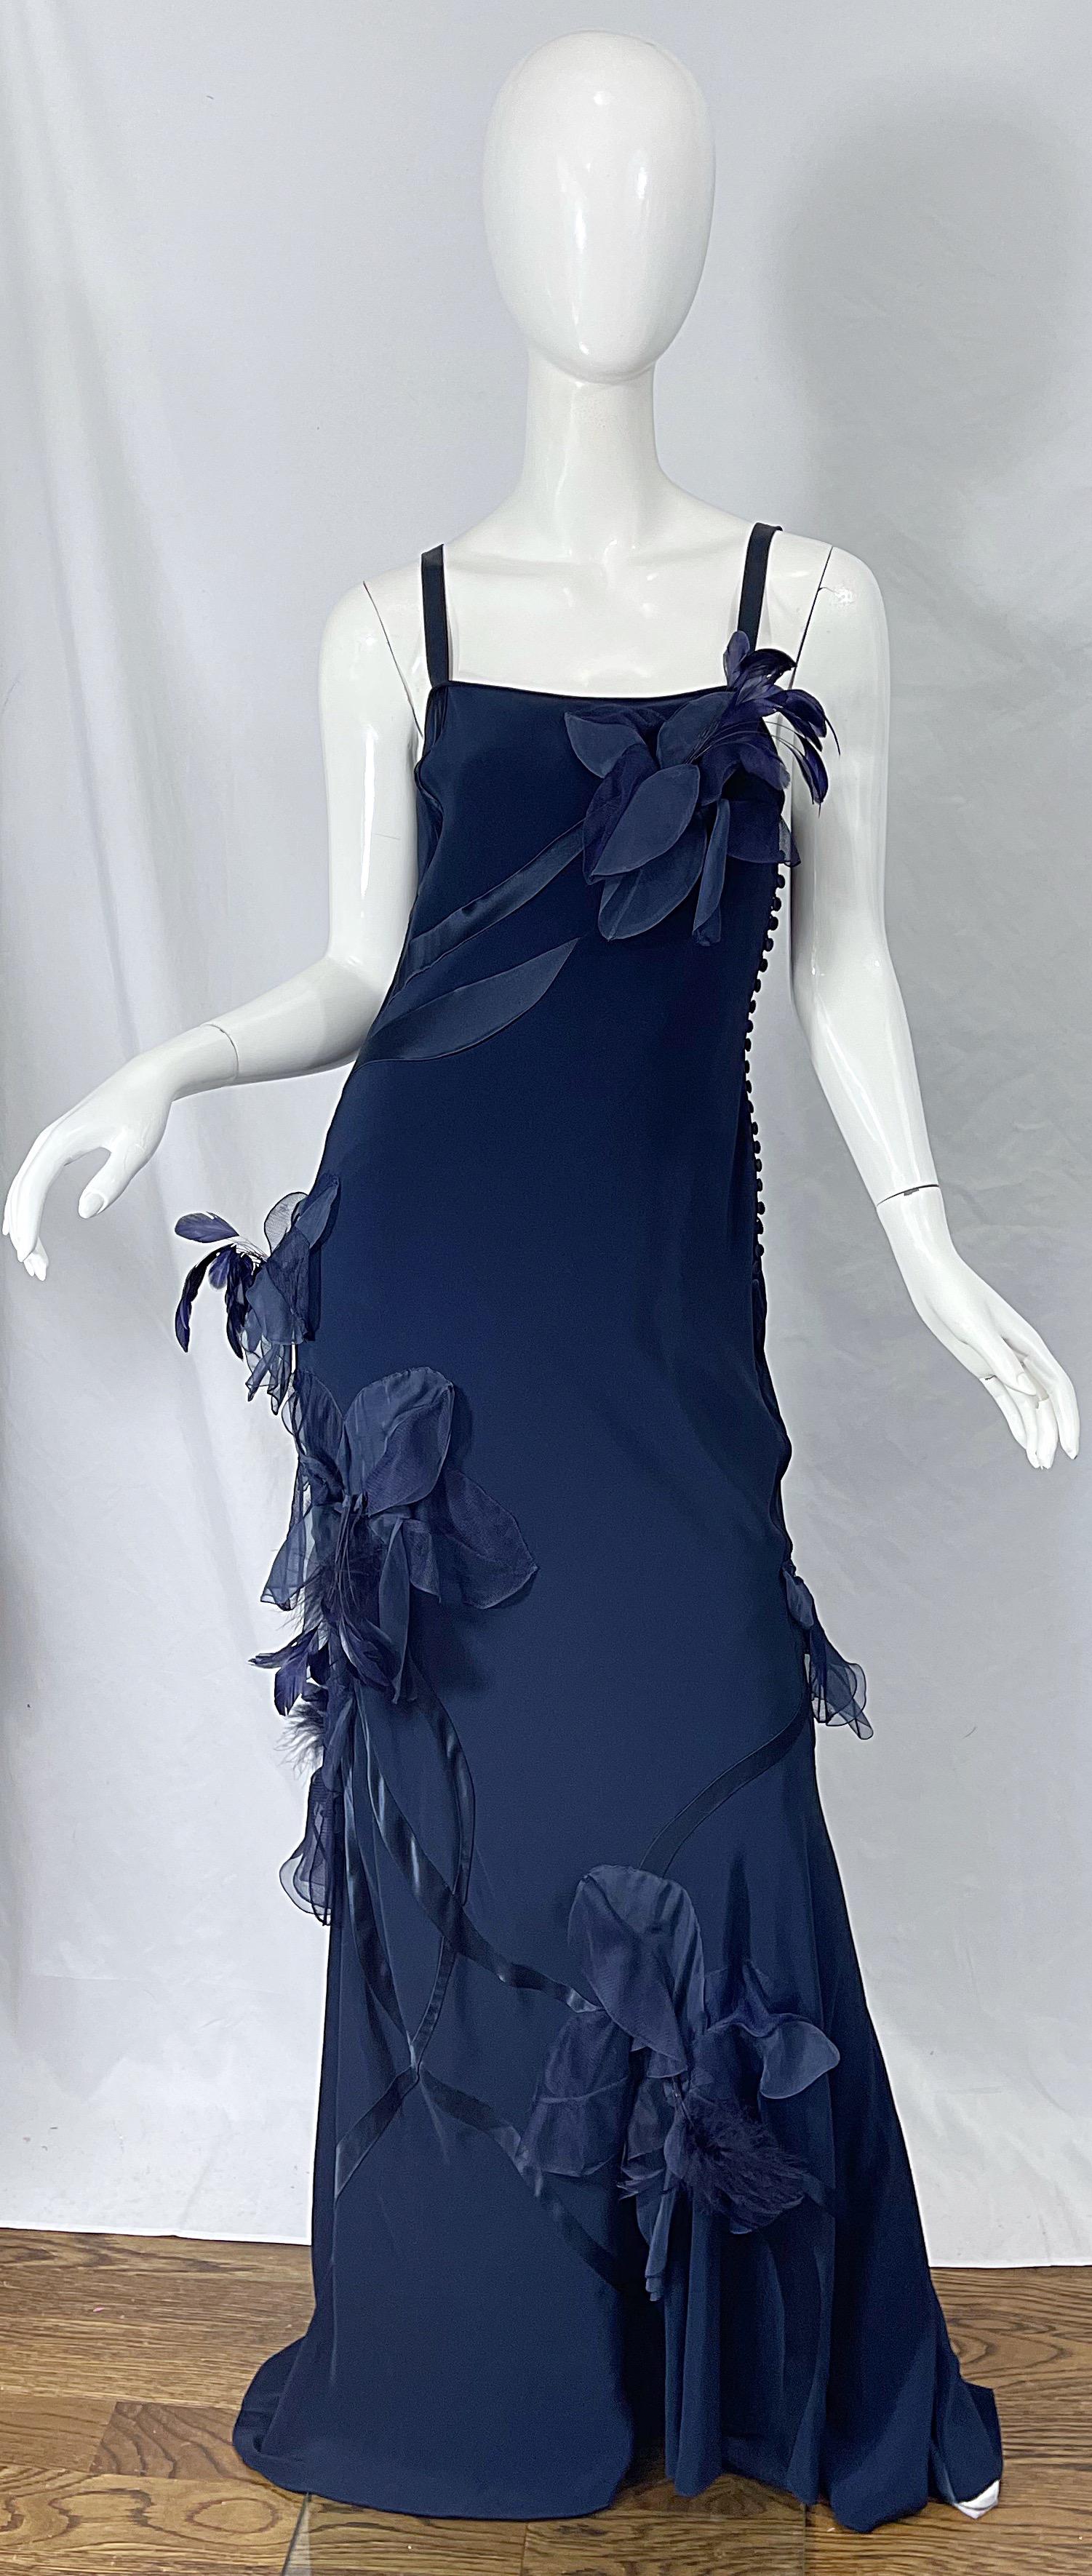 NWT John Galliano Size 10 Early 2000s Navy Blue Feather Silk / Satin Gown Dress 9